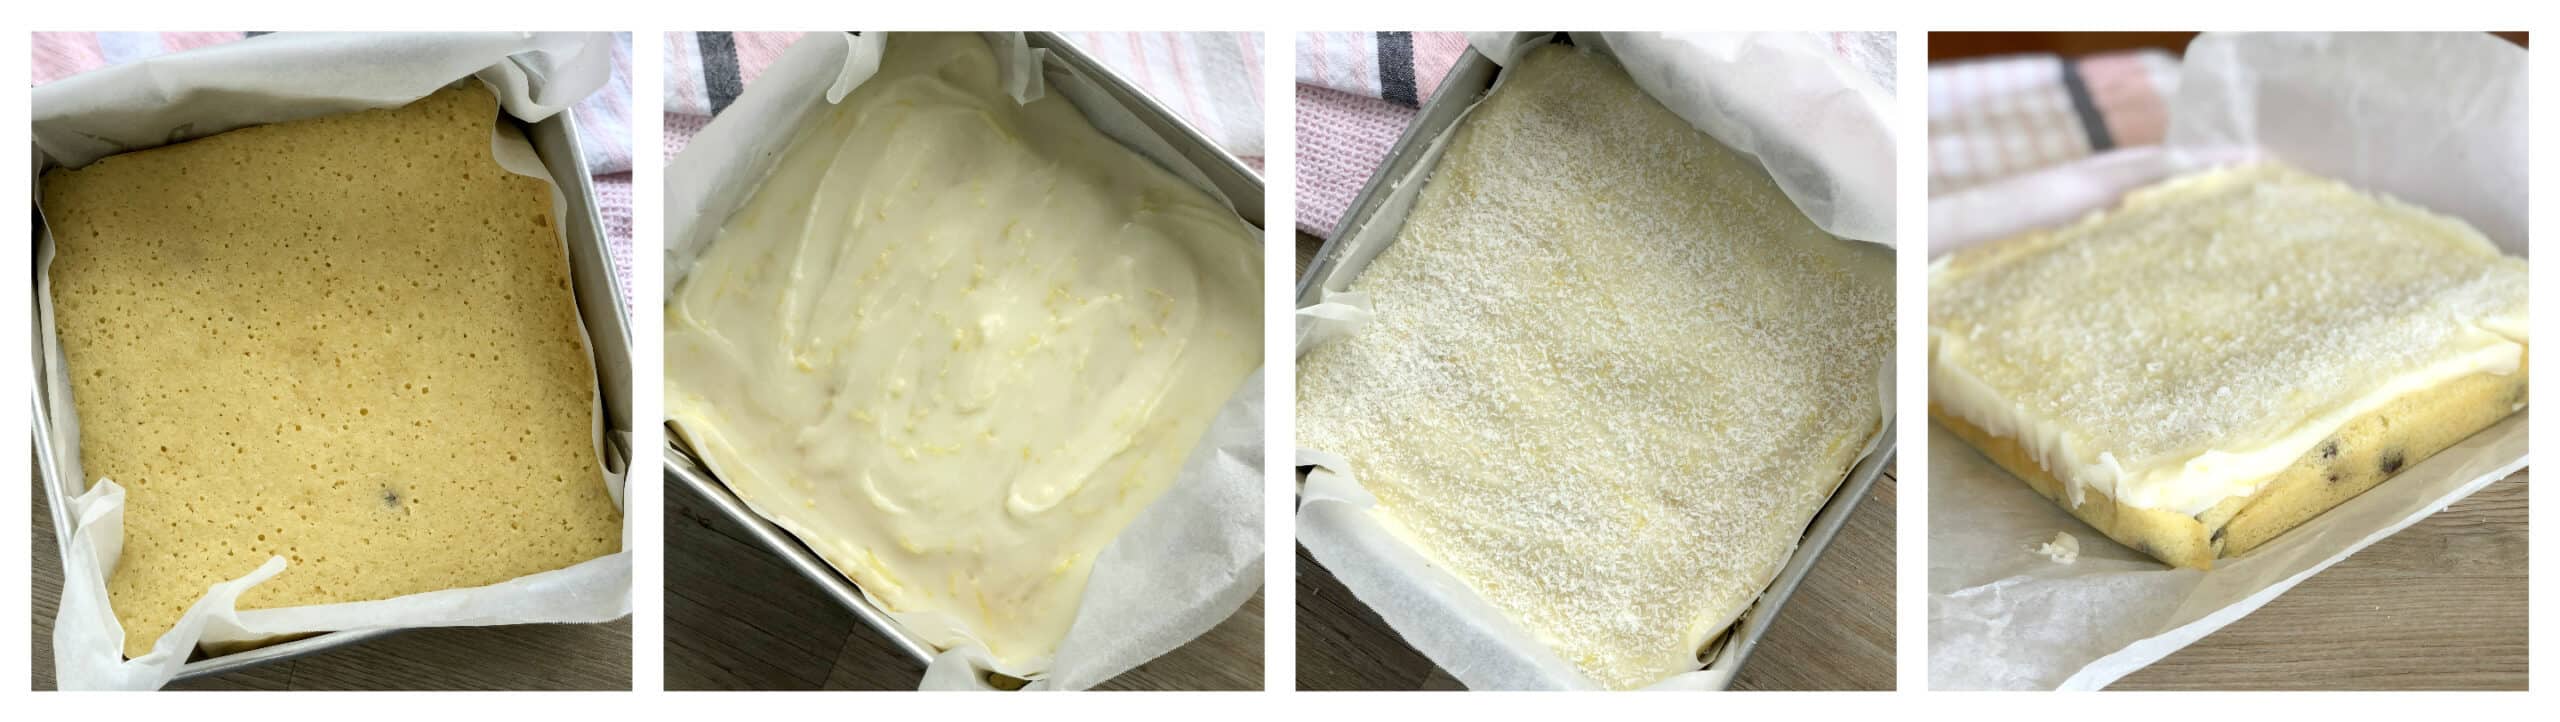 process photos showing coconut slice being iced and sprinkled with coconut 